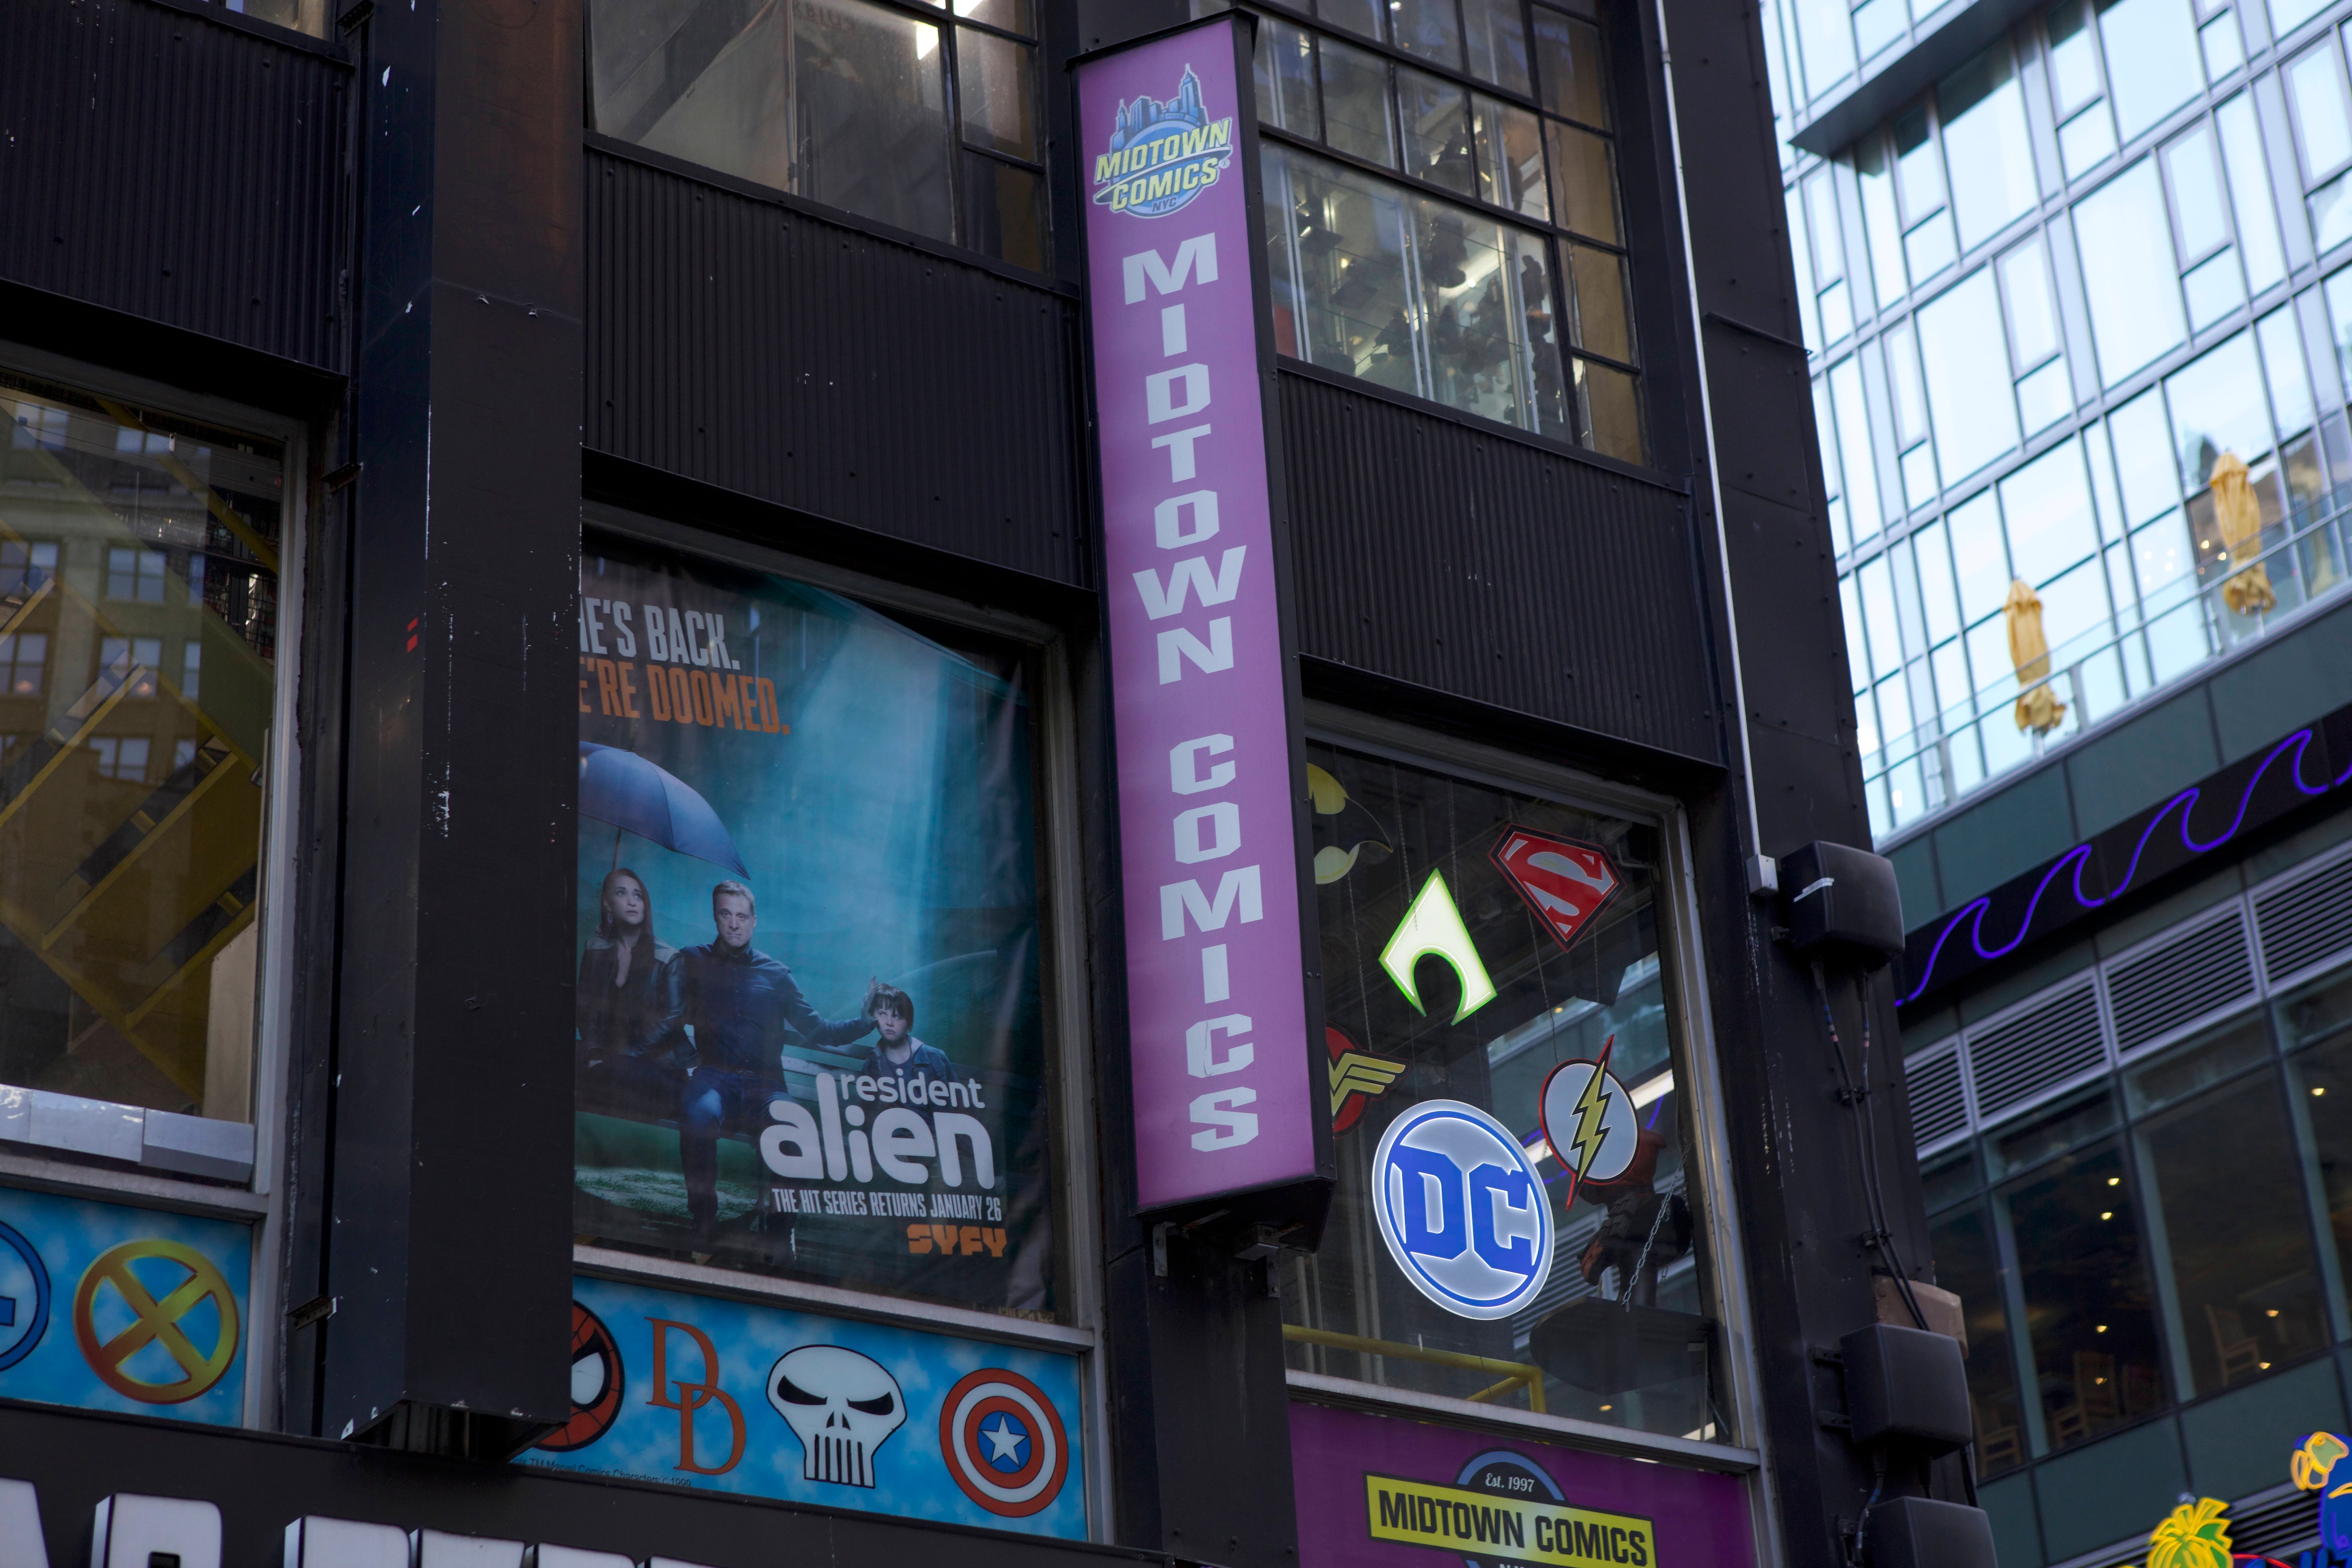 ‘Resident Alien’ takes over Midtown Comics in Times Square for the landing of Season 2 on SYFY